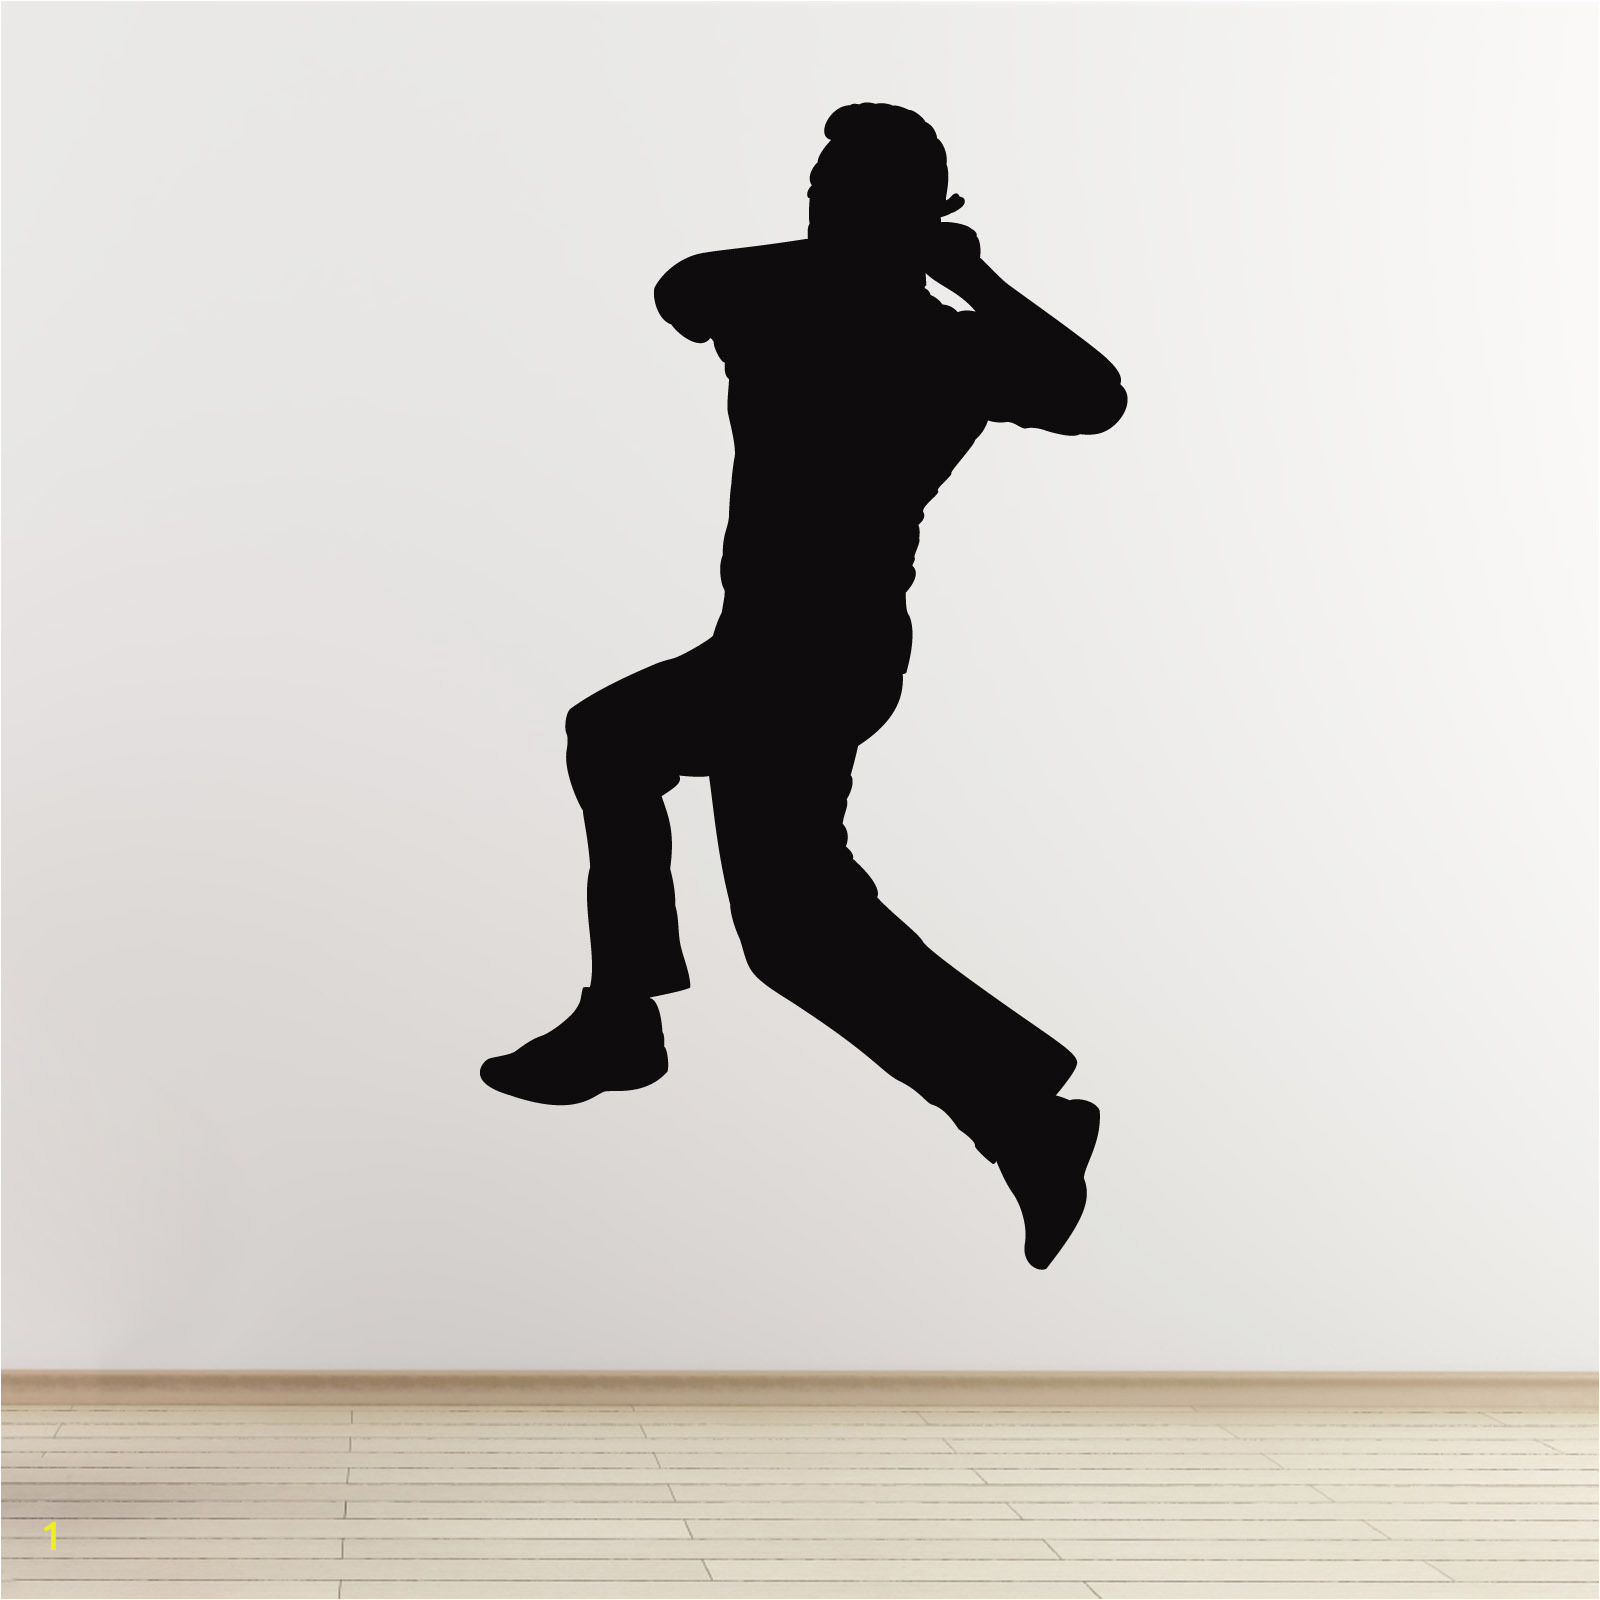 Extreme Sports Wall Mural Cricket Wall Sticker Spin Bowler Cricketer Wall Sticker